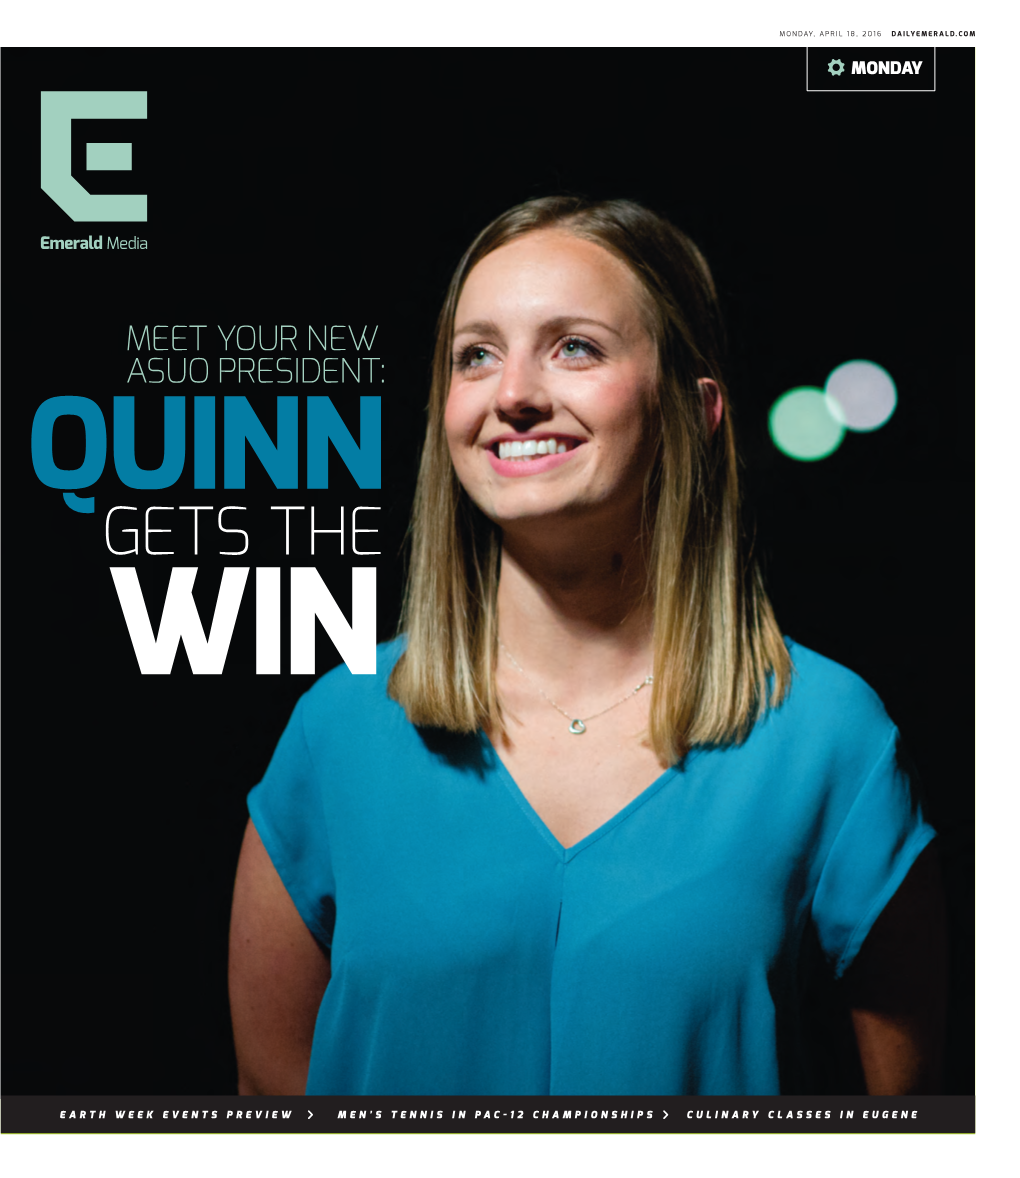 MEET YOUR NEW ASUO PRESIDENT: Quinn Gets the WIN